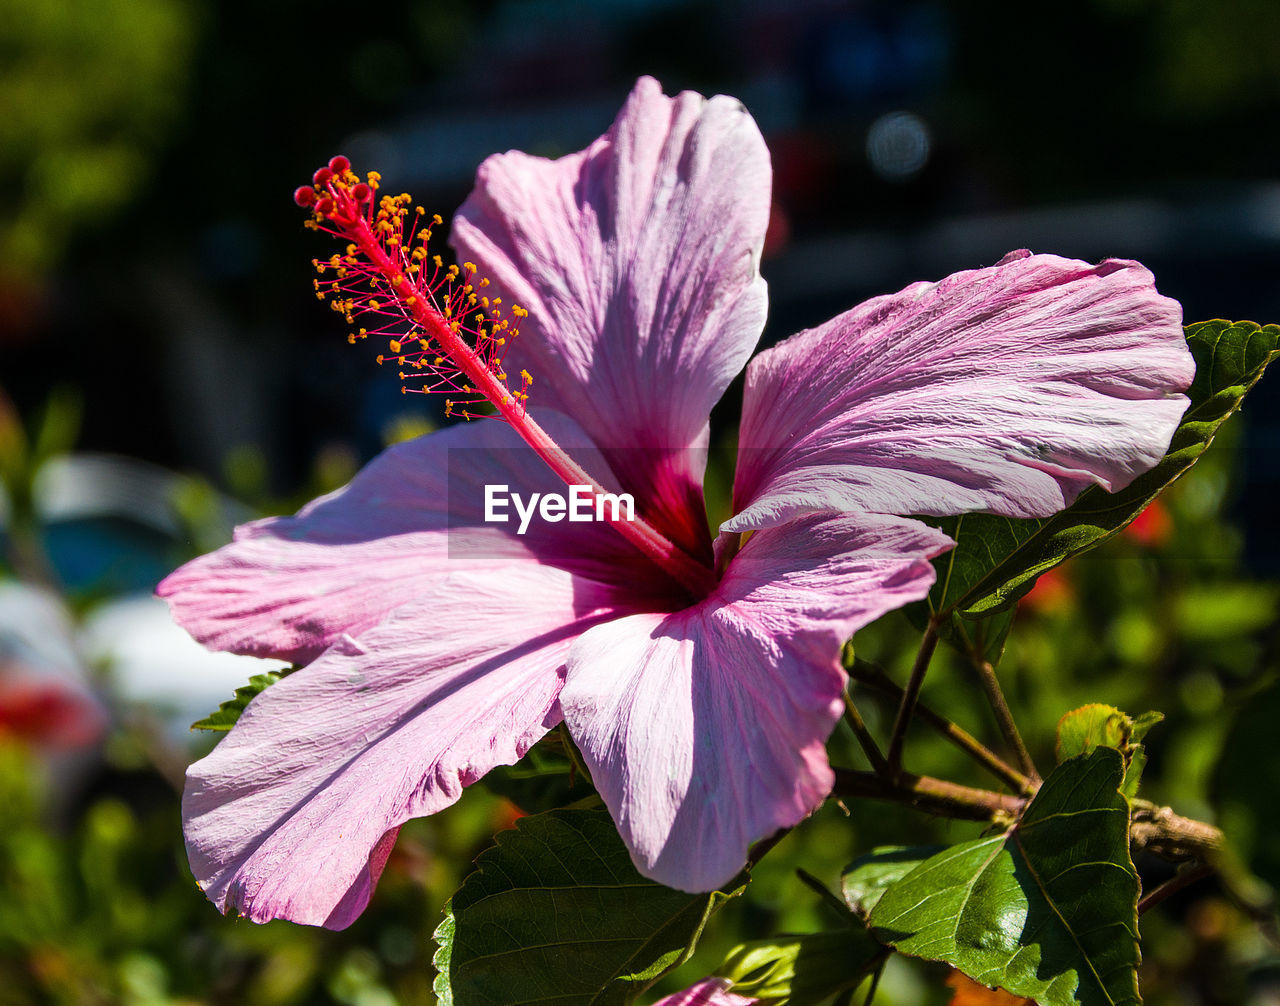 flowering plant, flower, plant, hibiscus, freshness, beauty in nature, petal, fragility, close-up, flower head, inflorescence, malvales, nature, pink, growth, blossom, pollen, focus on foreground, macro photography, botany, no people, outdoors, springtime, purple, stamen, sunlight, plant part, magenta, leaf, summer, day